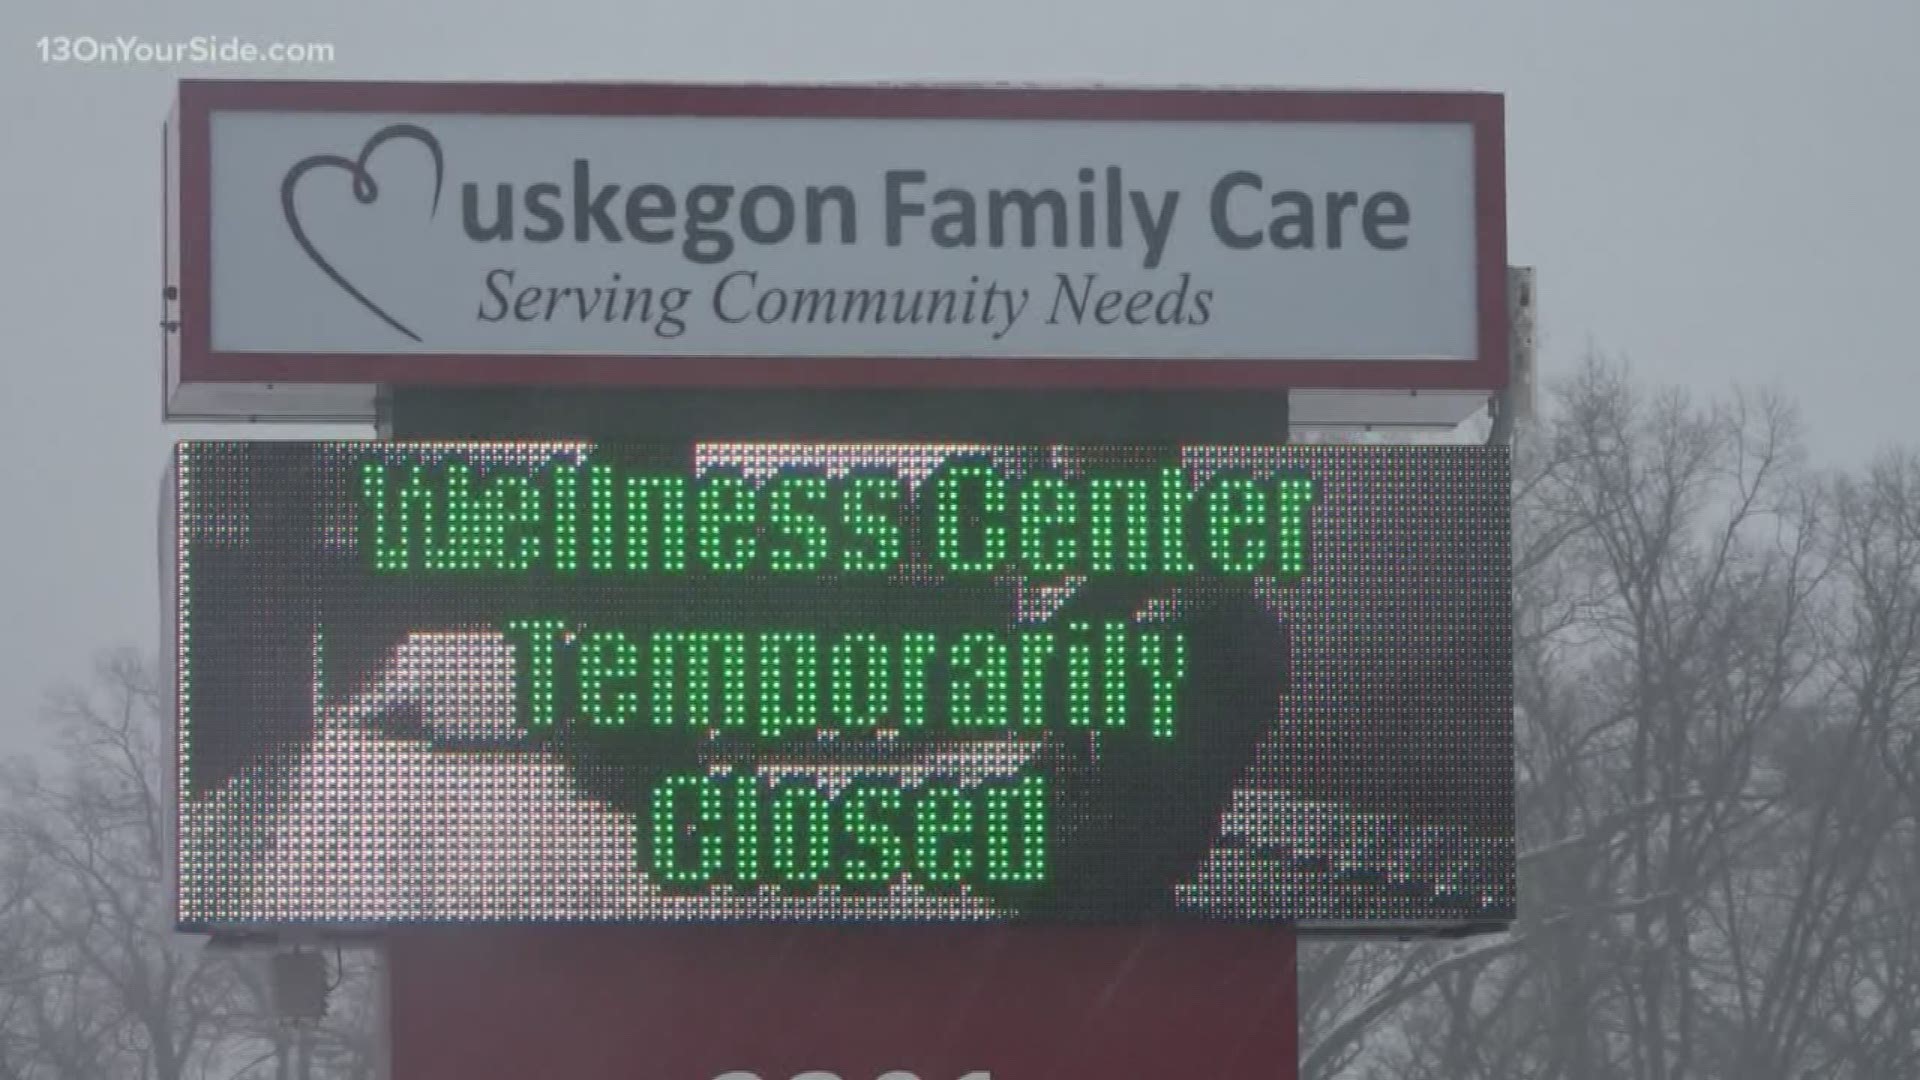 Muskegon Family Care announced Monday that health clinic will officially shutdown on March 31.